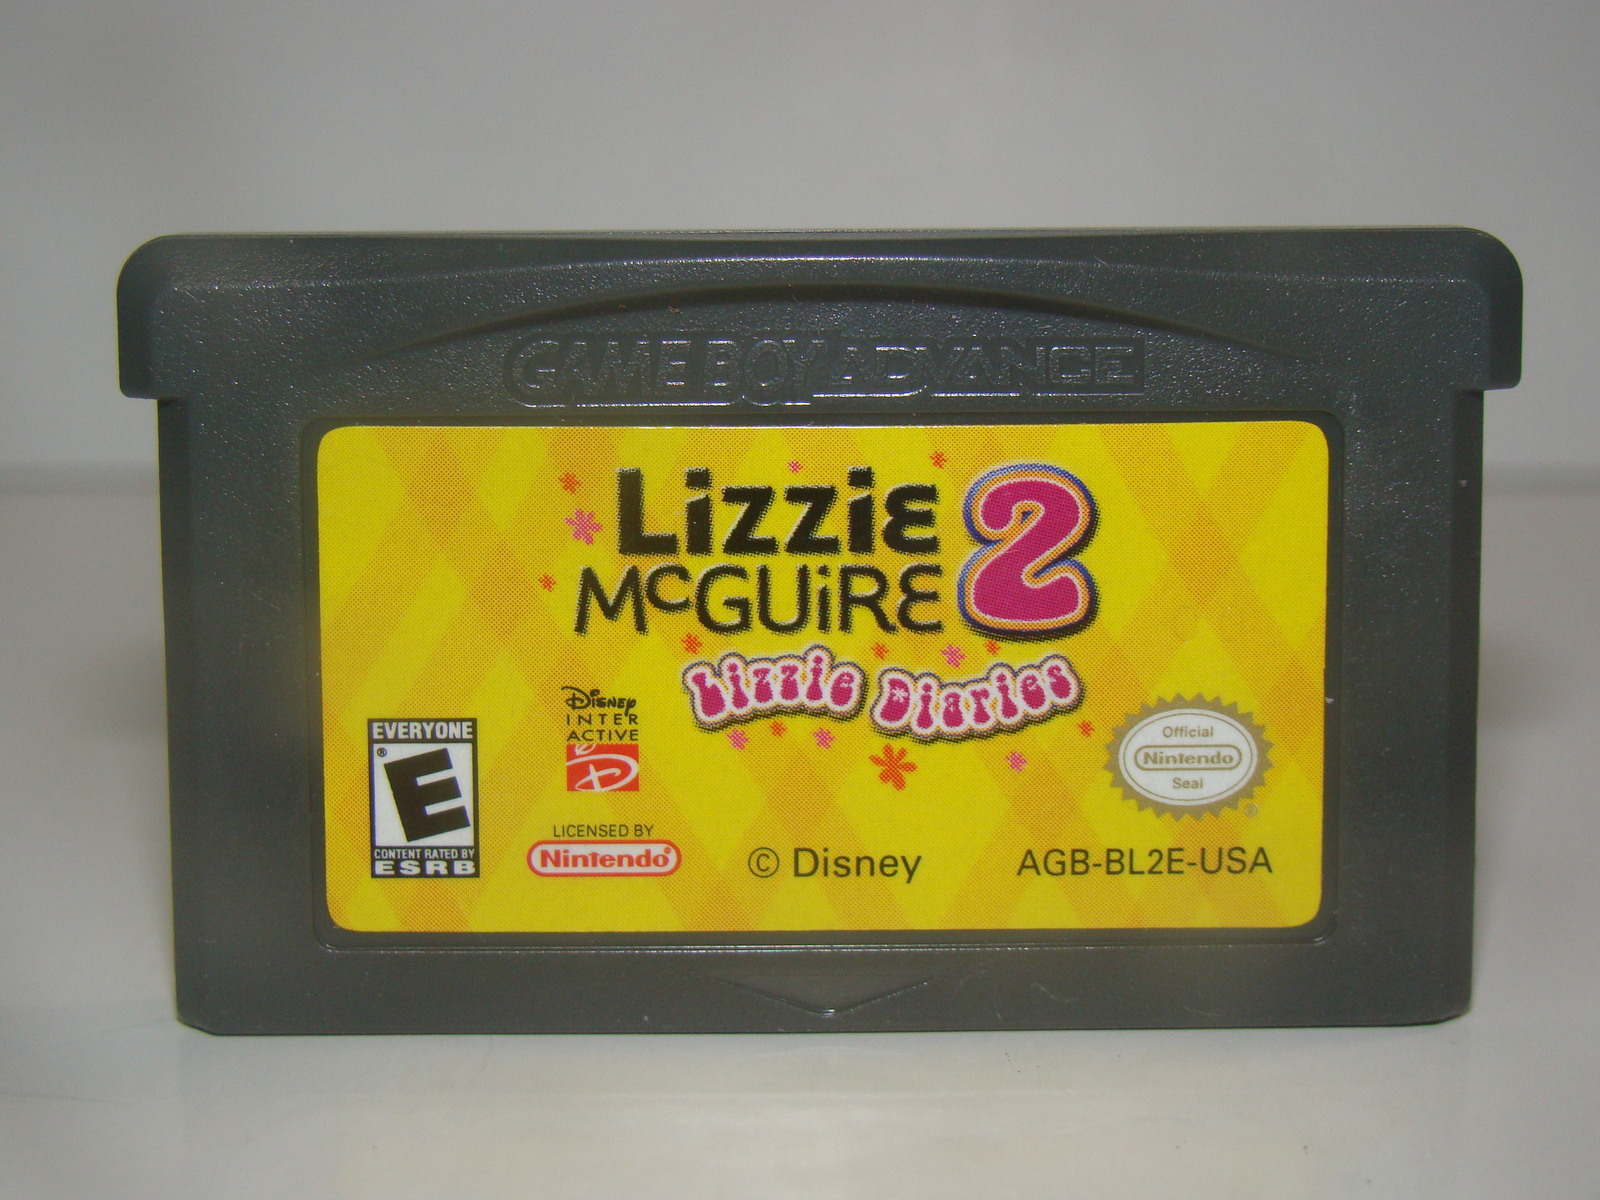 Primary image for Nintendo - GAME BOY ADVANCE - LIZZIE McGUIRE 2 Lizzie Diaries (Game Only)